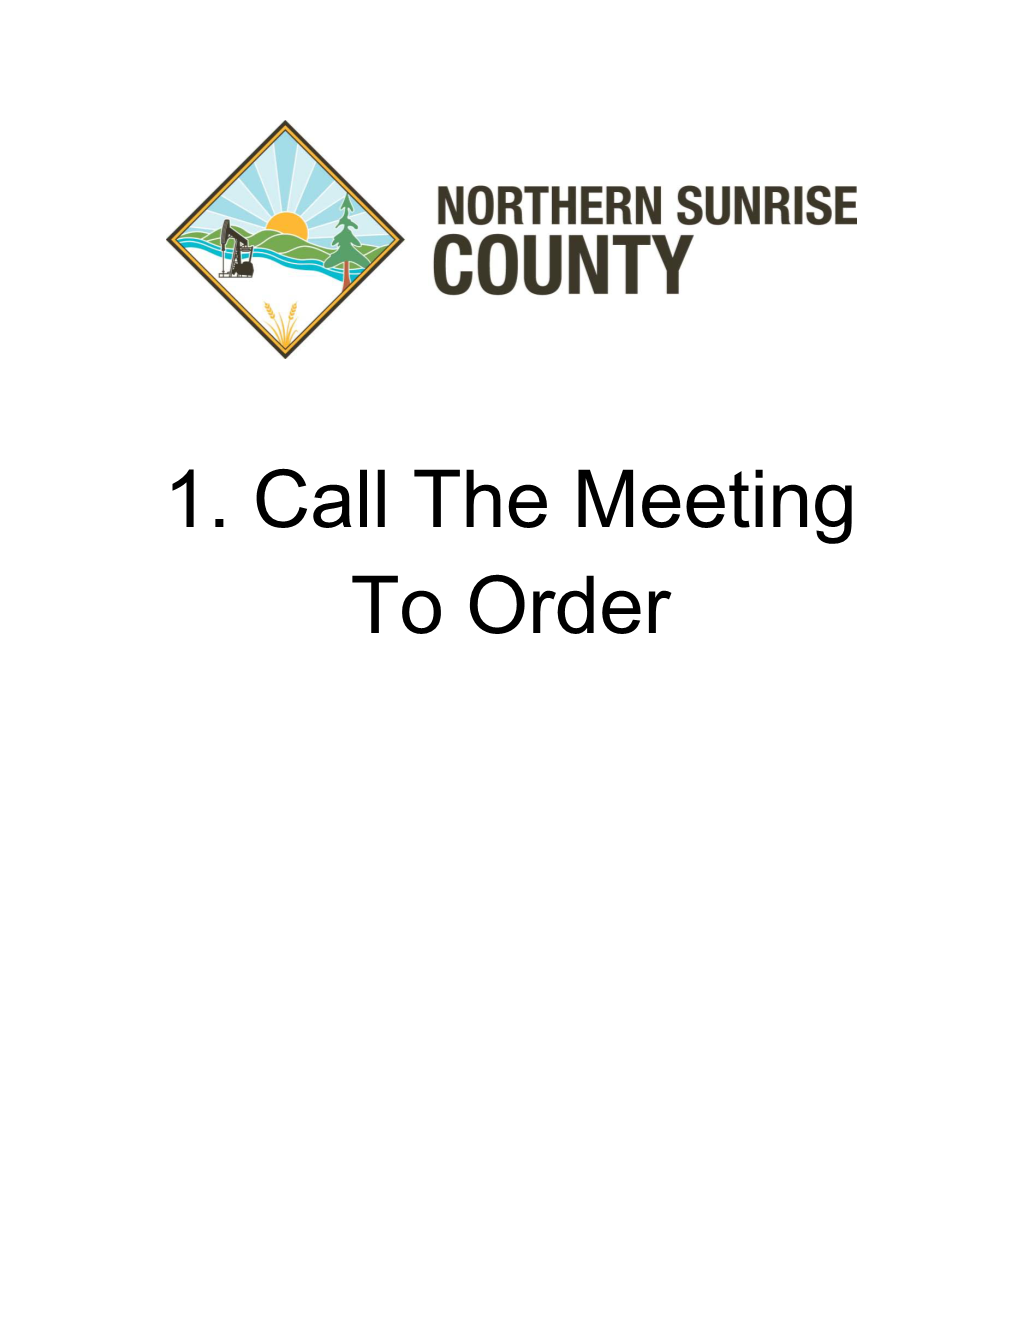 1. Call the Meeting to Order